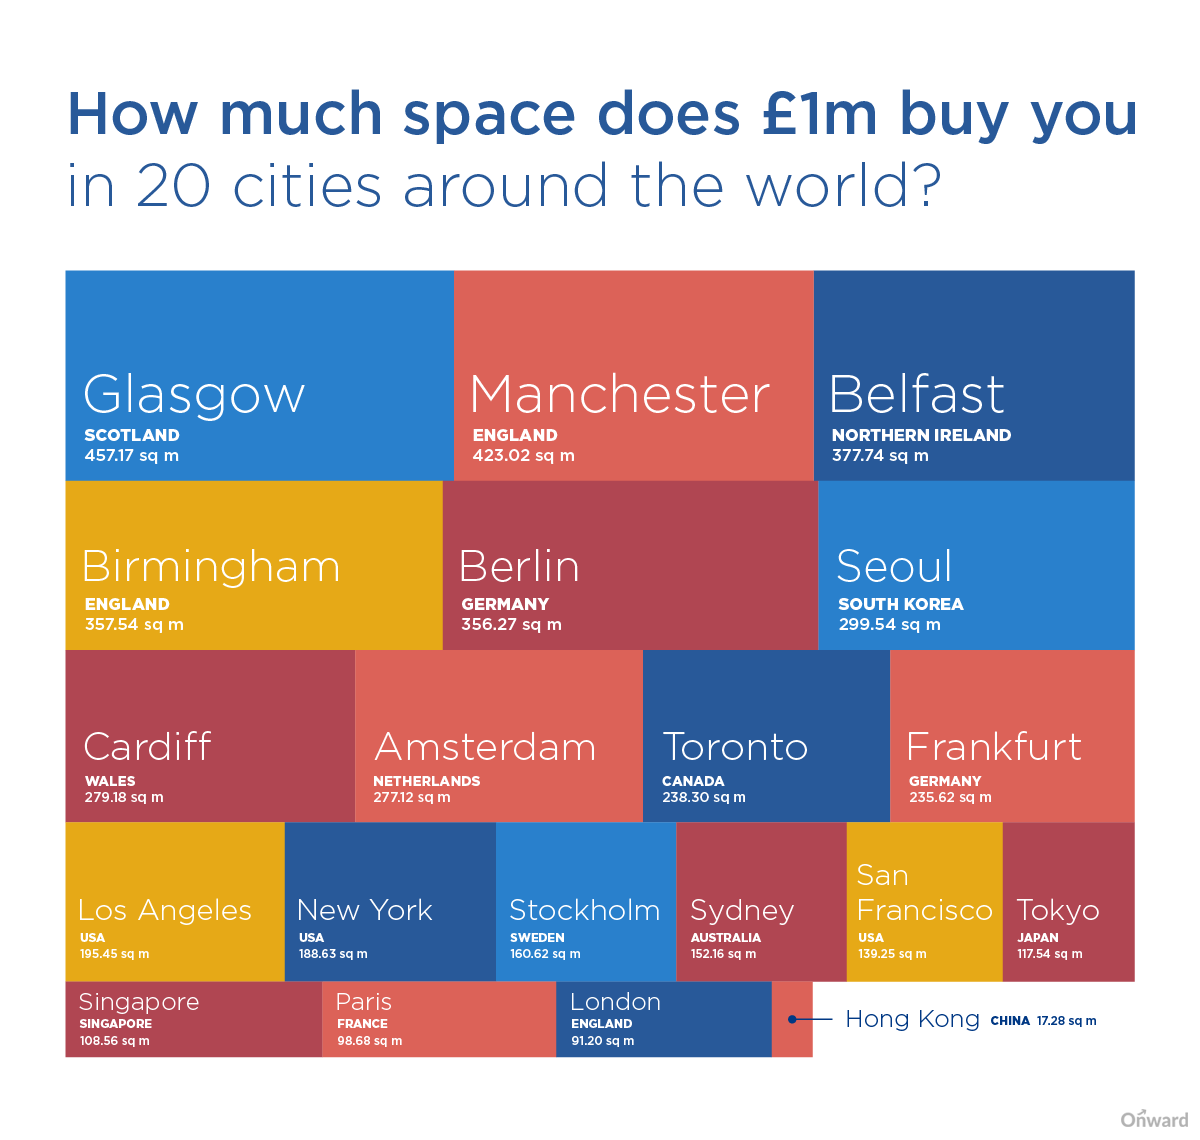 How Much Space Does £1 Million Buy You in 20 Cities Around the World?